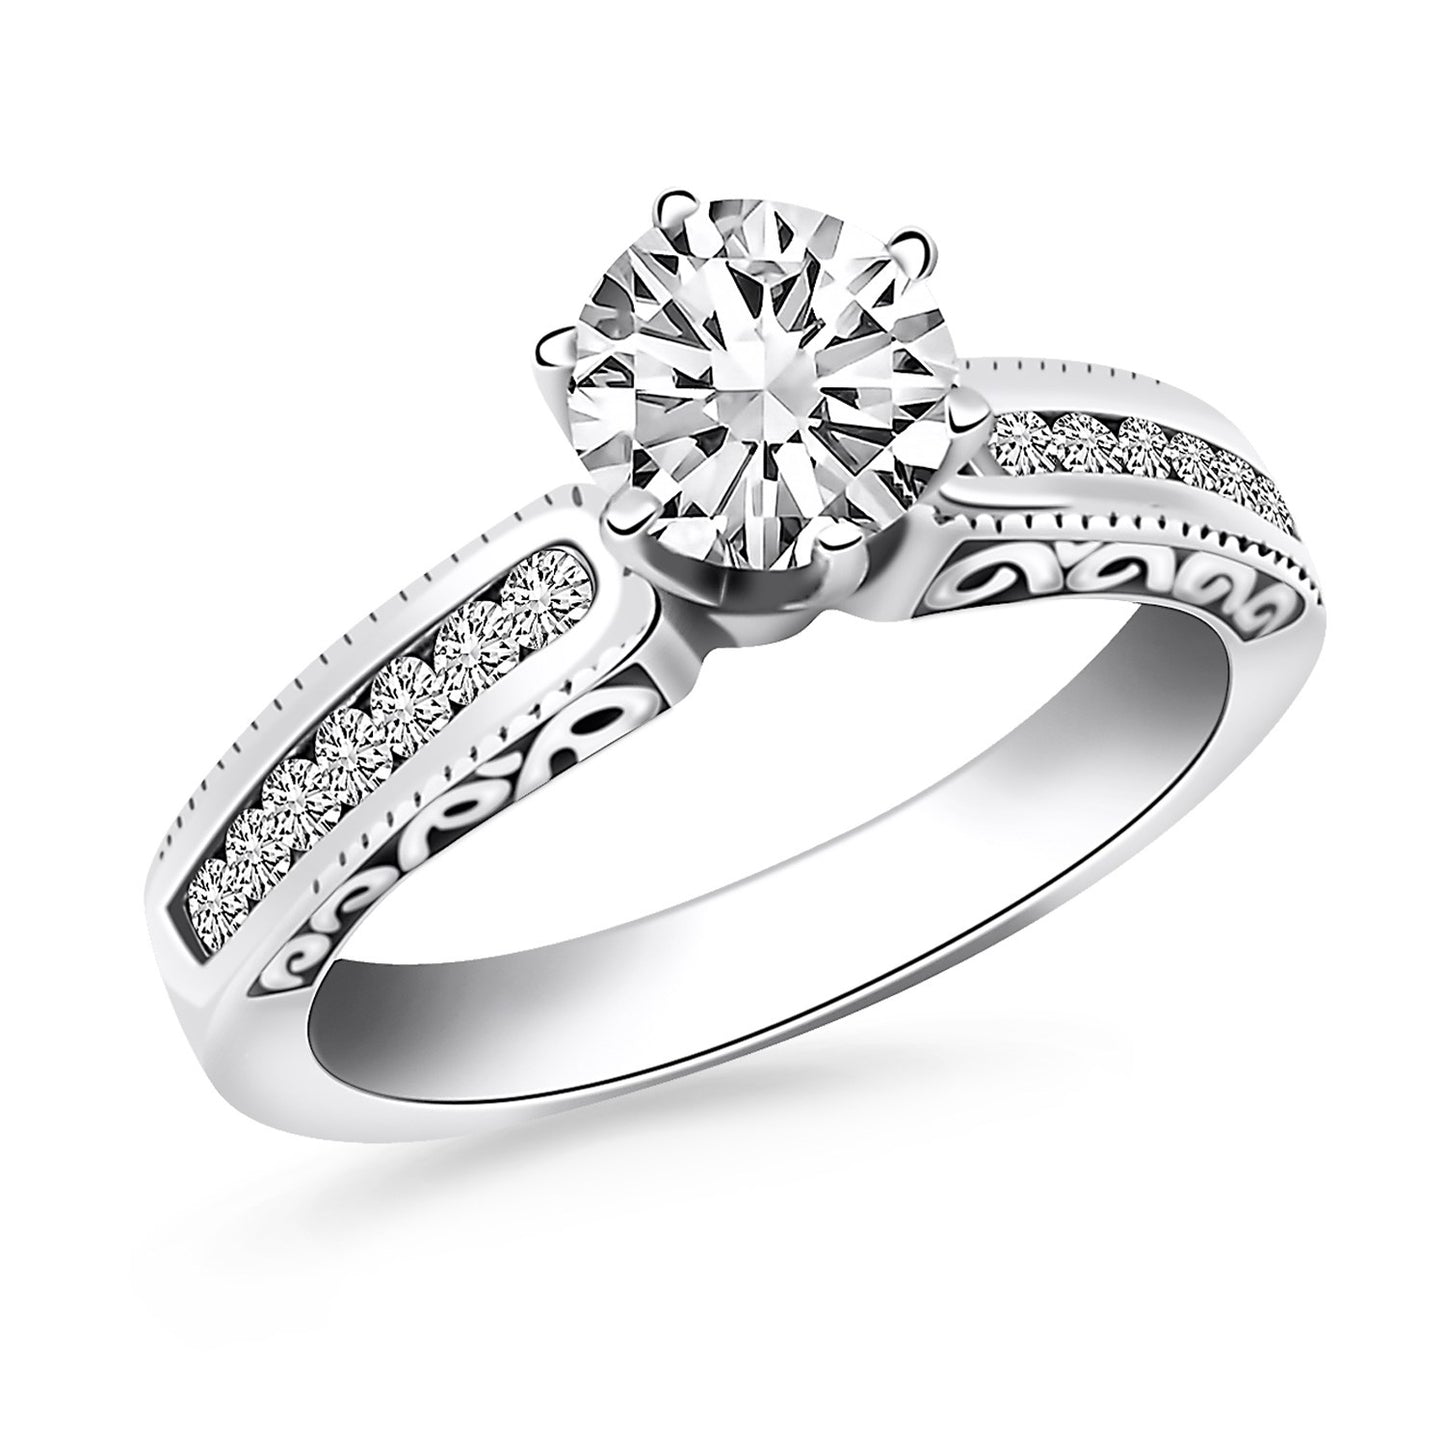 Channel Set Engagement Ring with Engraved Sides